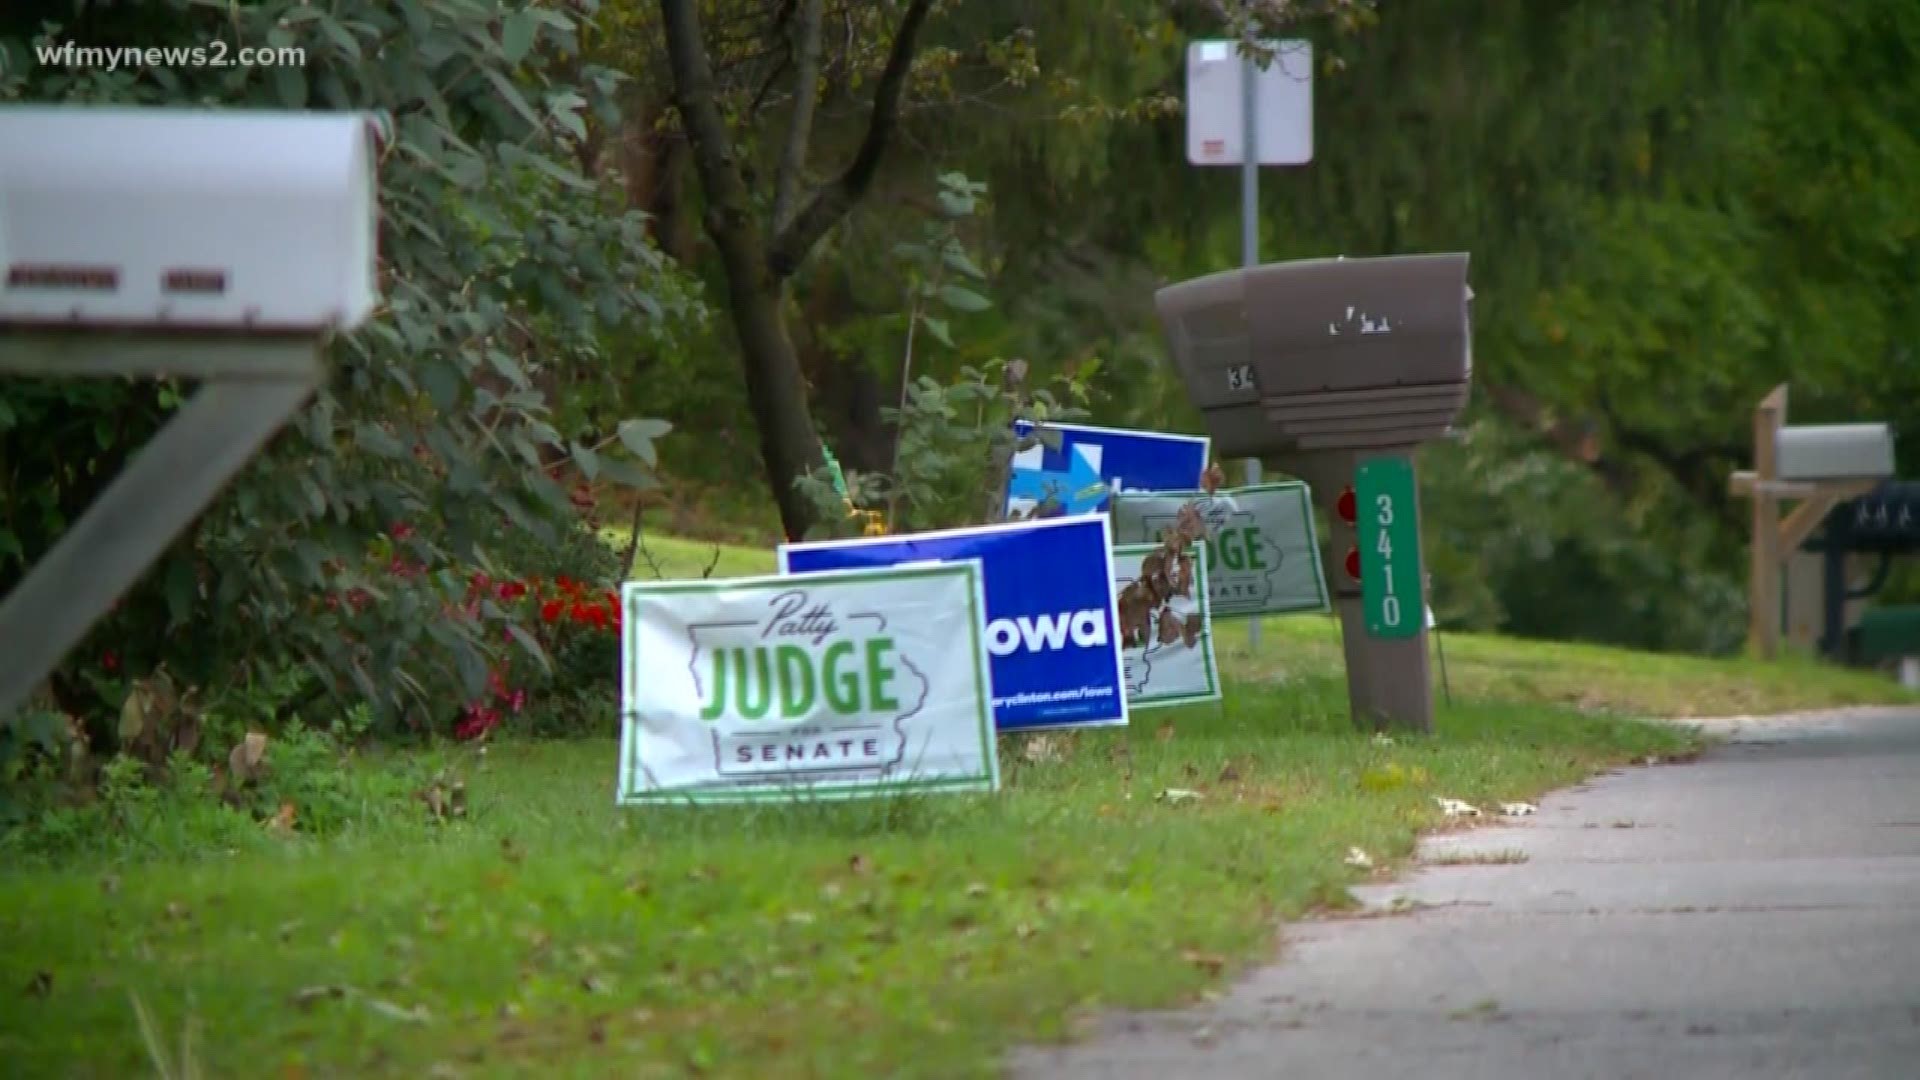 You see them all over town during election season, but how well do signs work for candidates?